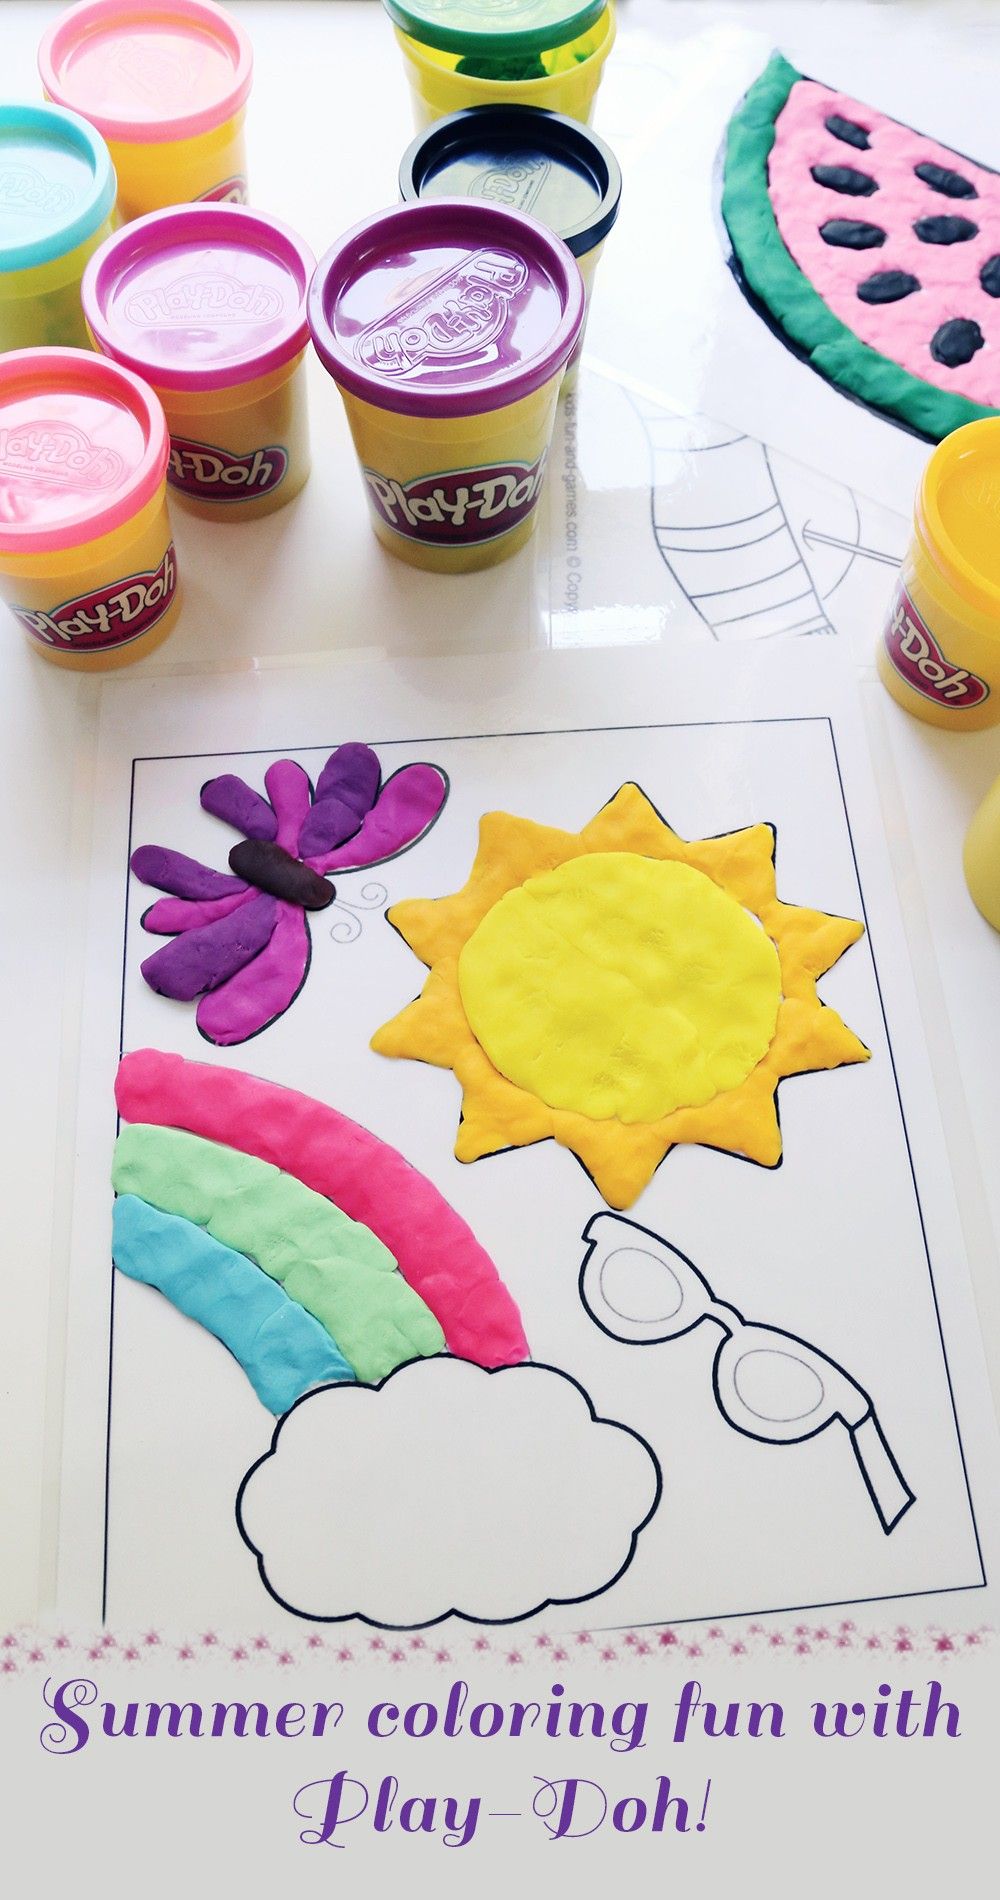 Summer coloring fun with play